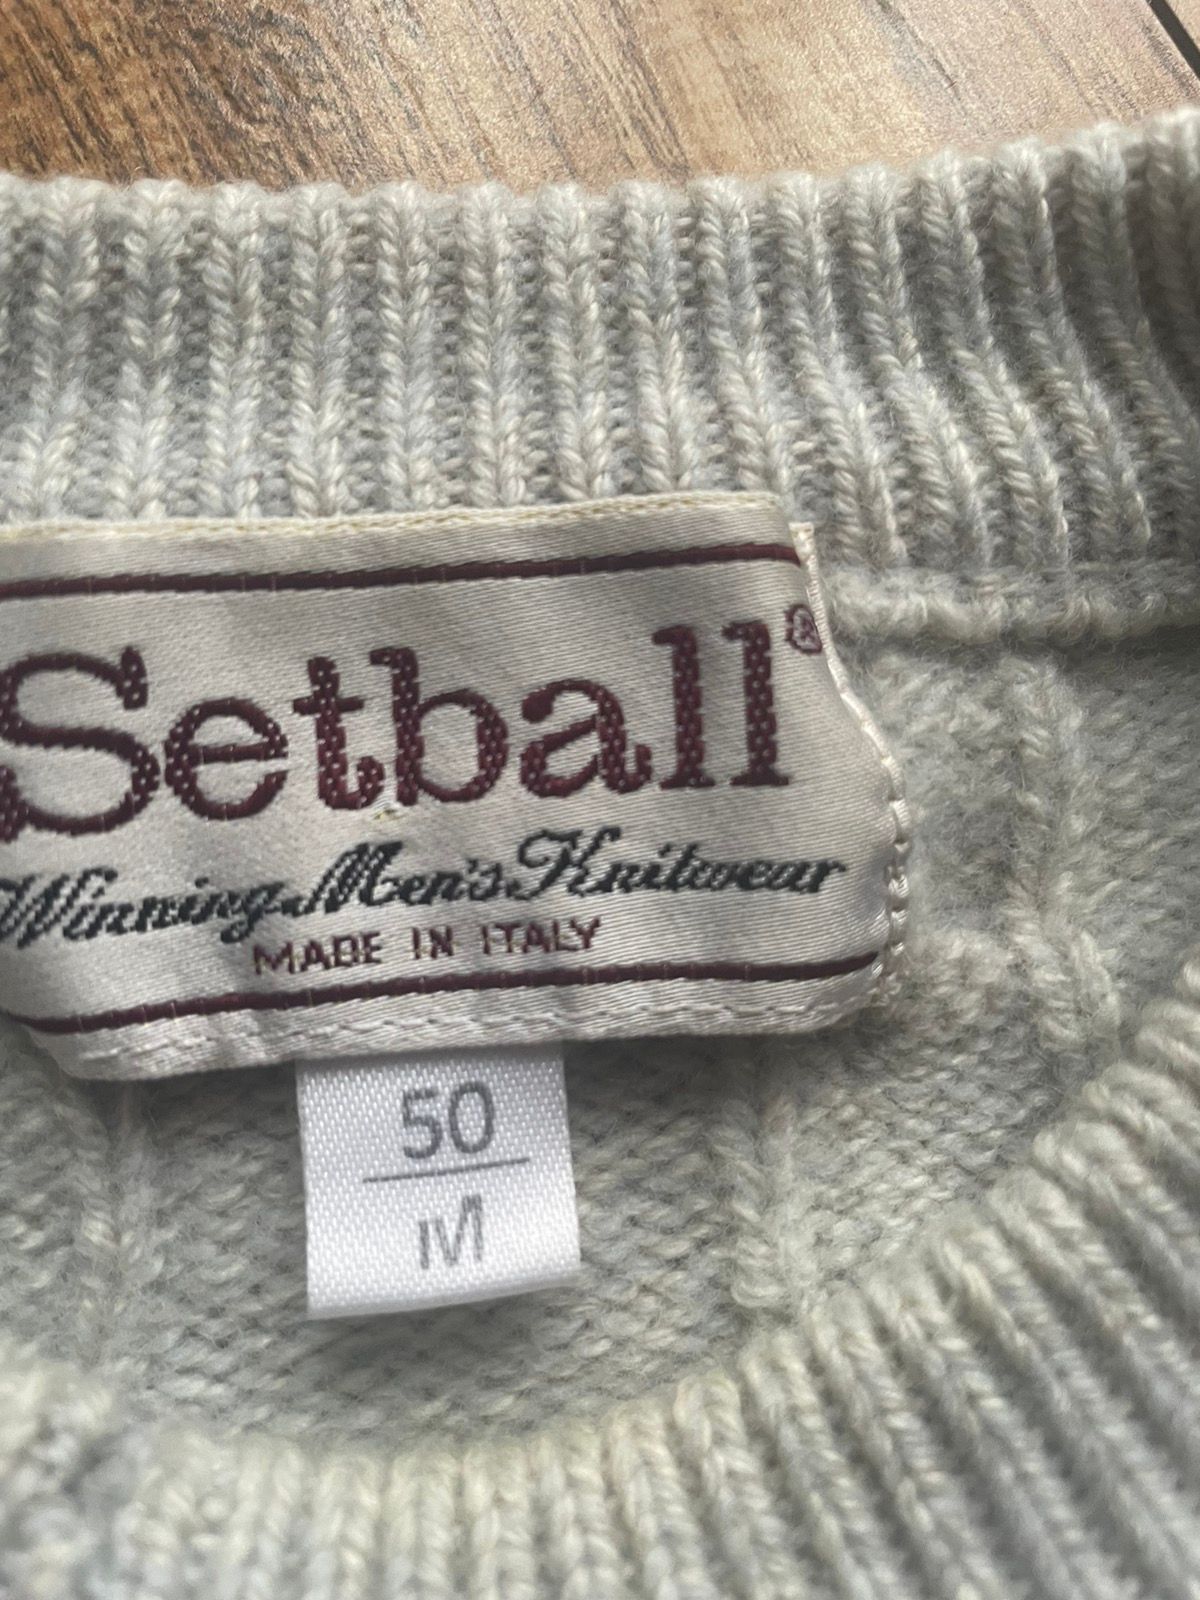 Vintage 🔥KNITTED SWEATER MADE IN ITALY, SETBALL, NEW YEAR, snow Size US M / EU 48-50 / 2 - 5 Thumbnail